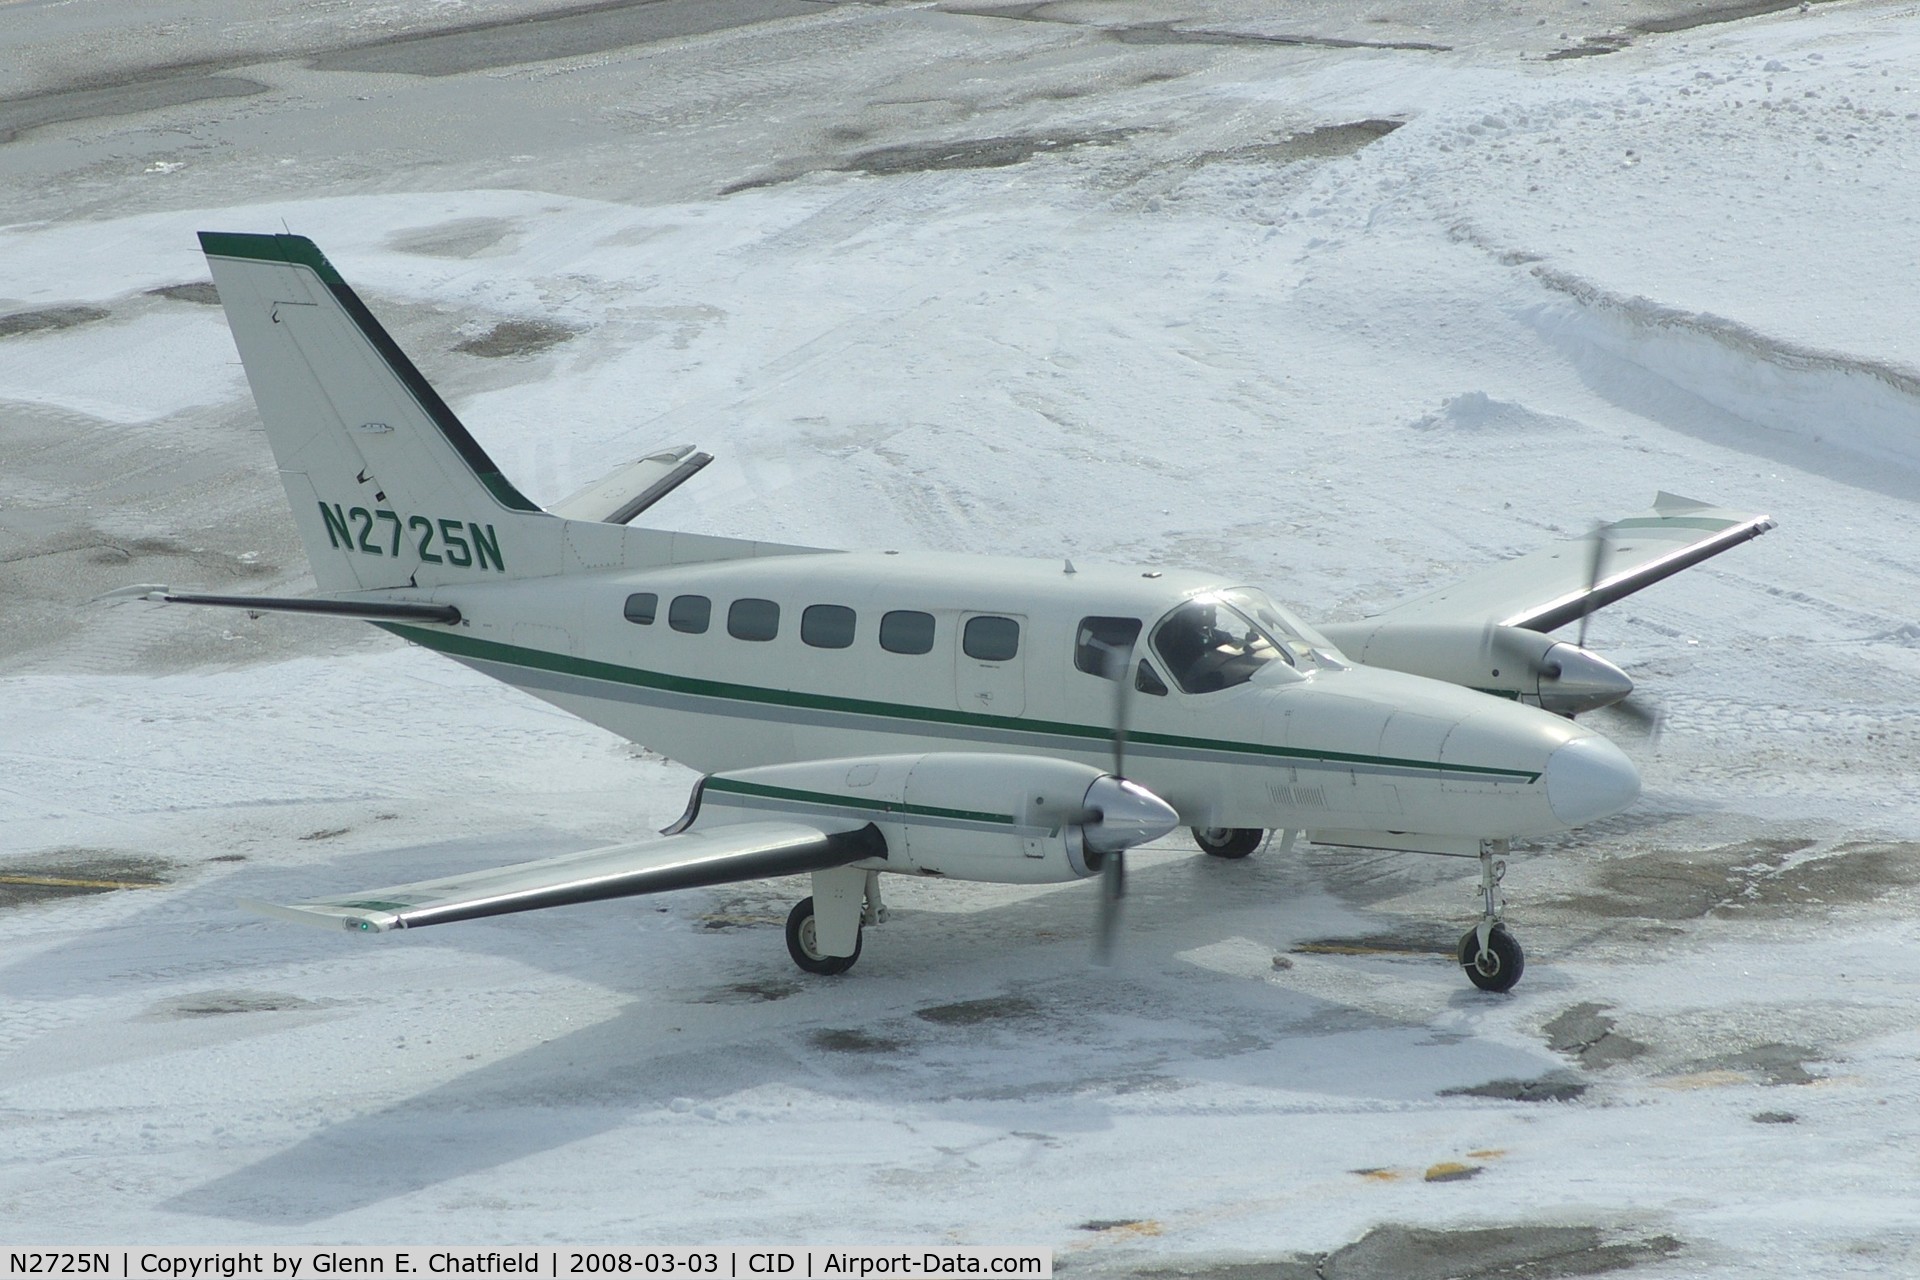 N2725N, 1980 Cessna 441 Conquest II C/N 441-0190, Taxiing to the ramp